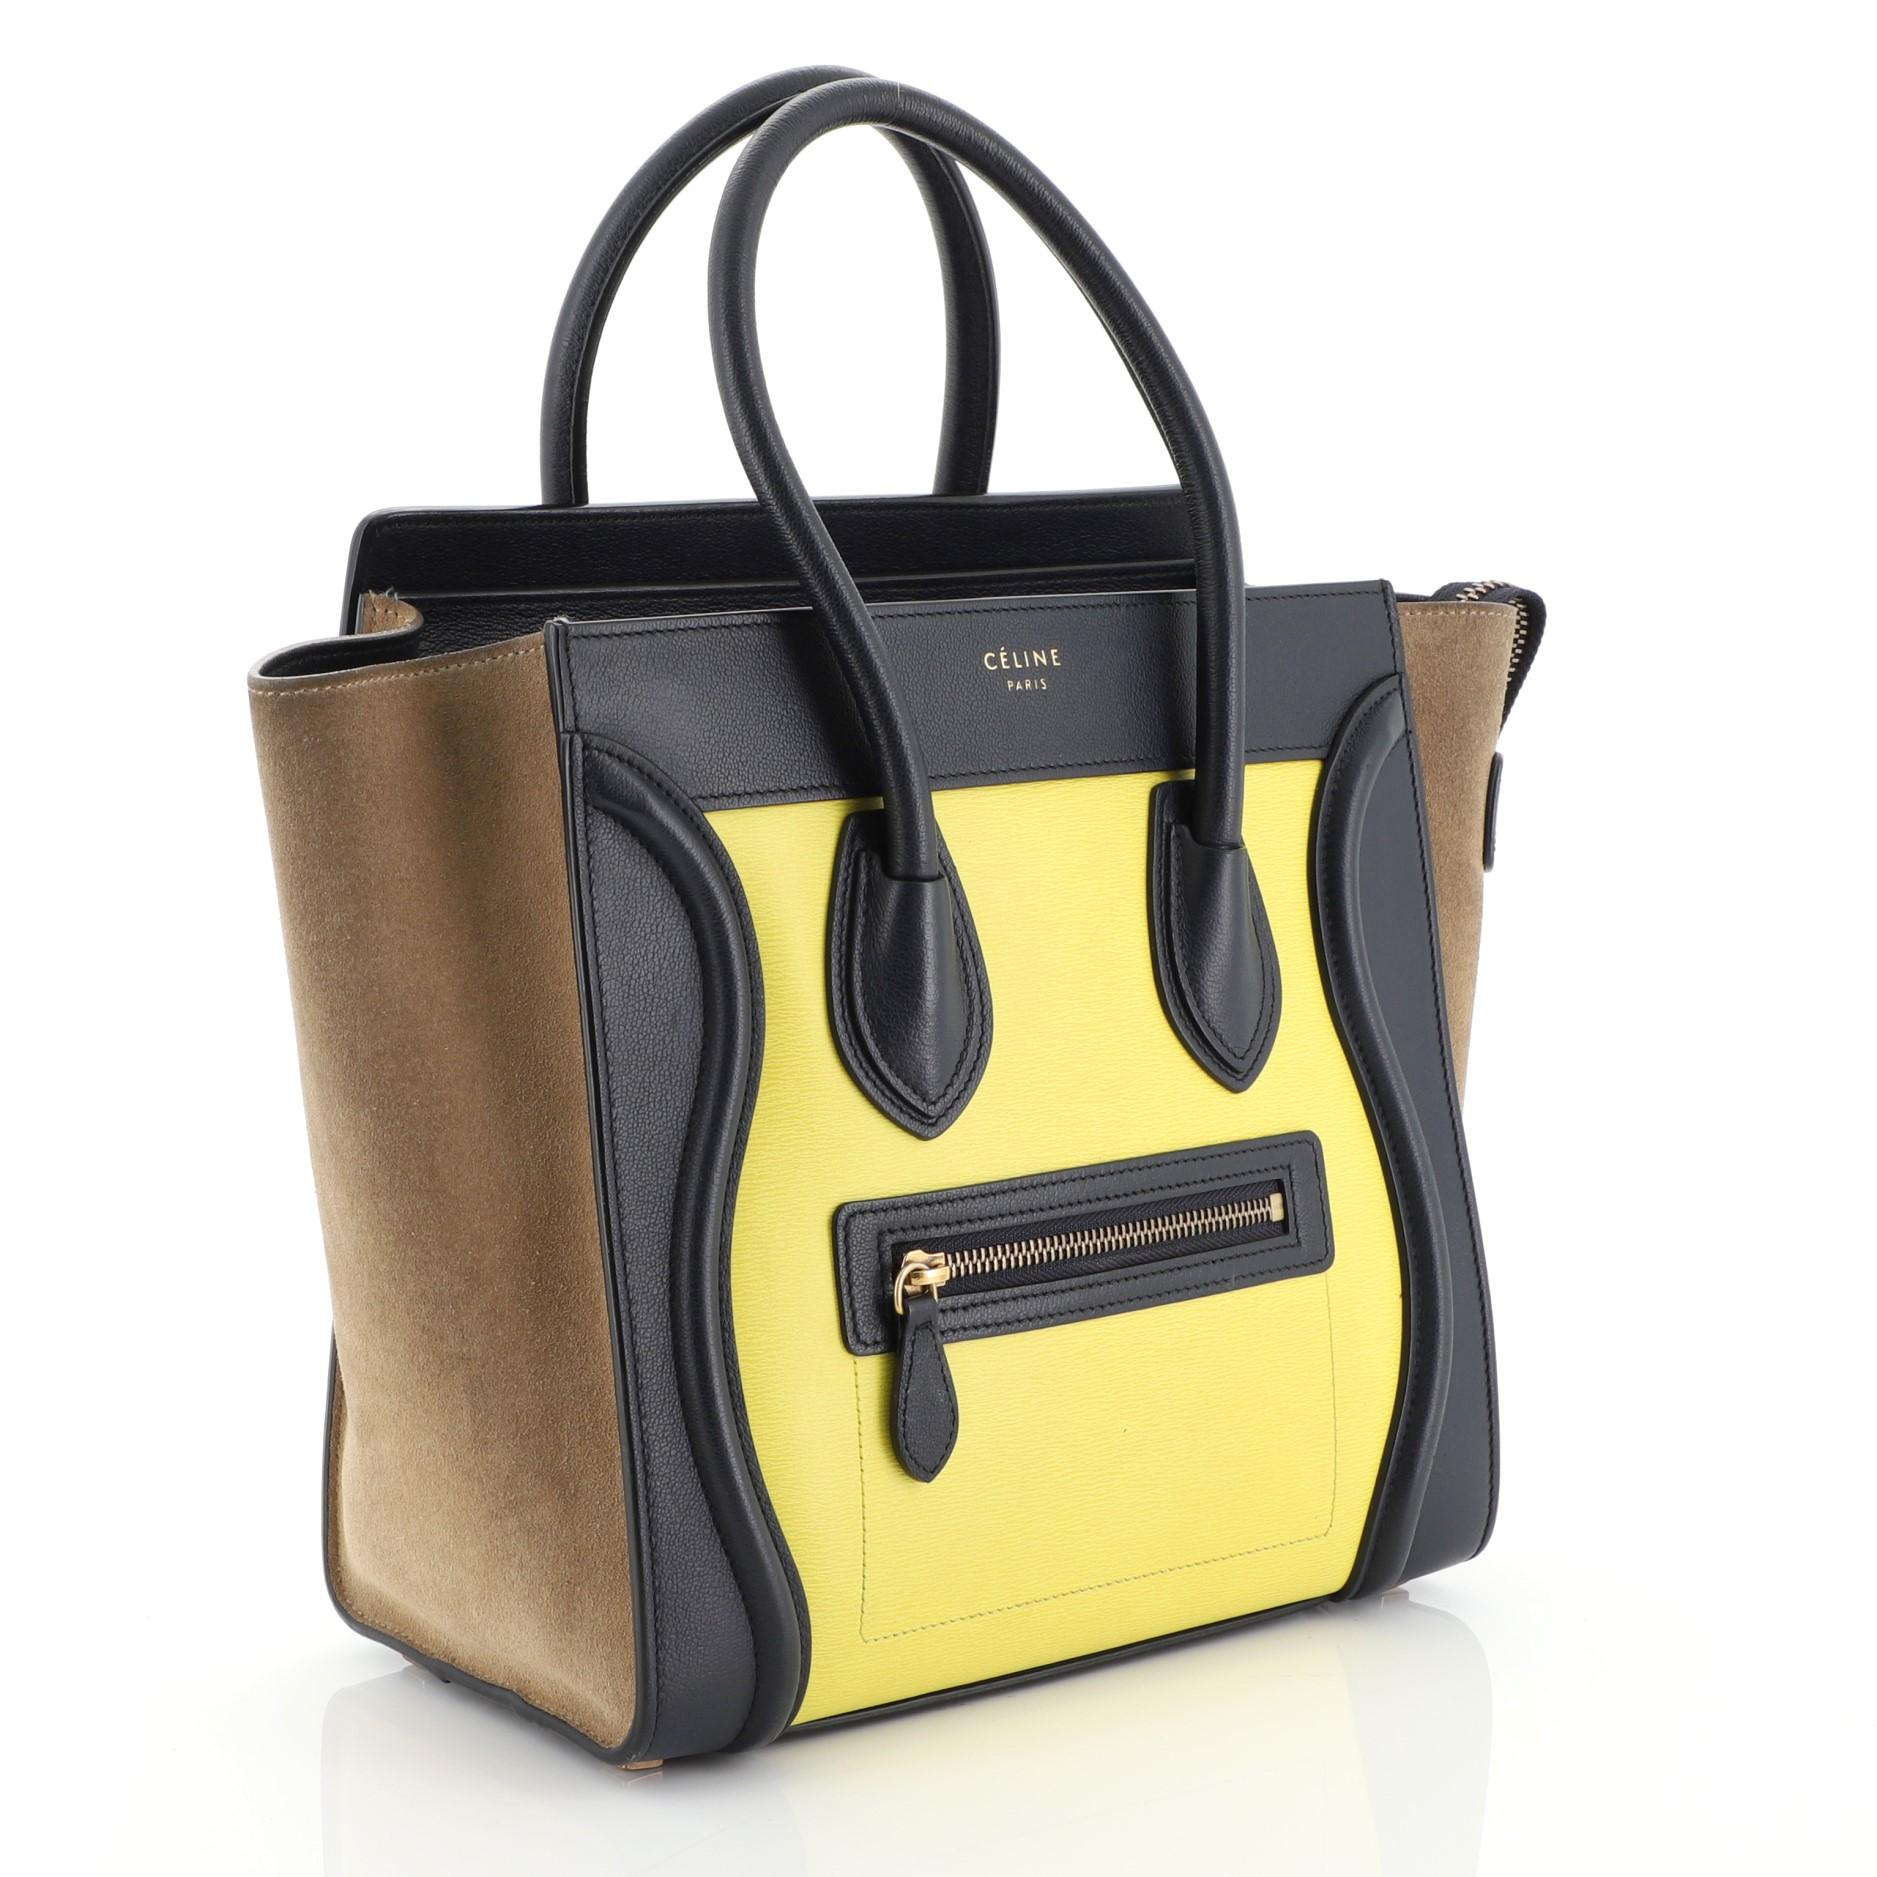 This Celine Tricolor Luggage Handbag Leather Micro, crafted in blue, yellow and brown leather, features dual rolled leather handles, front zip pocket, and aged gold-tone hardware. Its zip closure opens to a blue leather interior with zip and slip